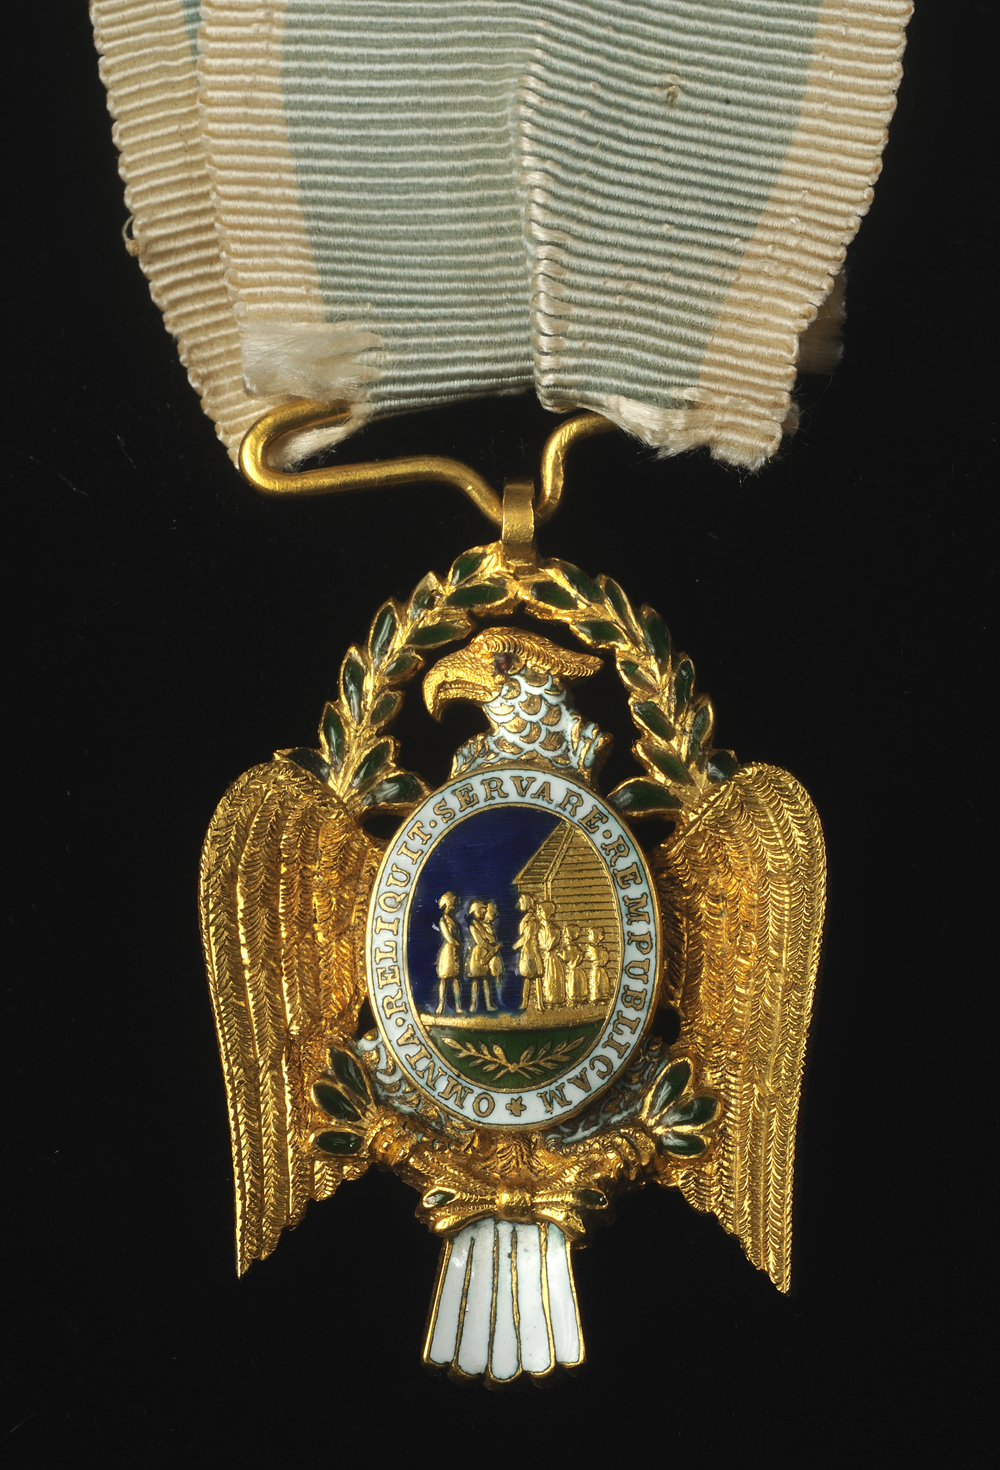 Society of the Cincinnati Eagle insignia owned by Larz Anderson, ca. 1910